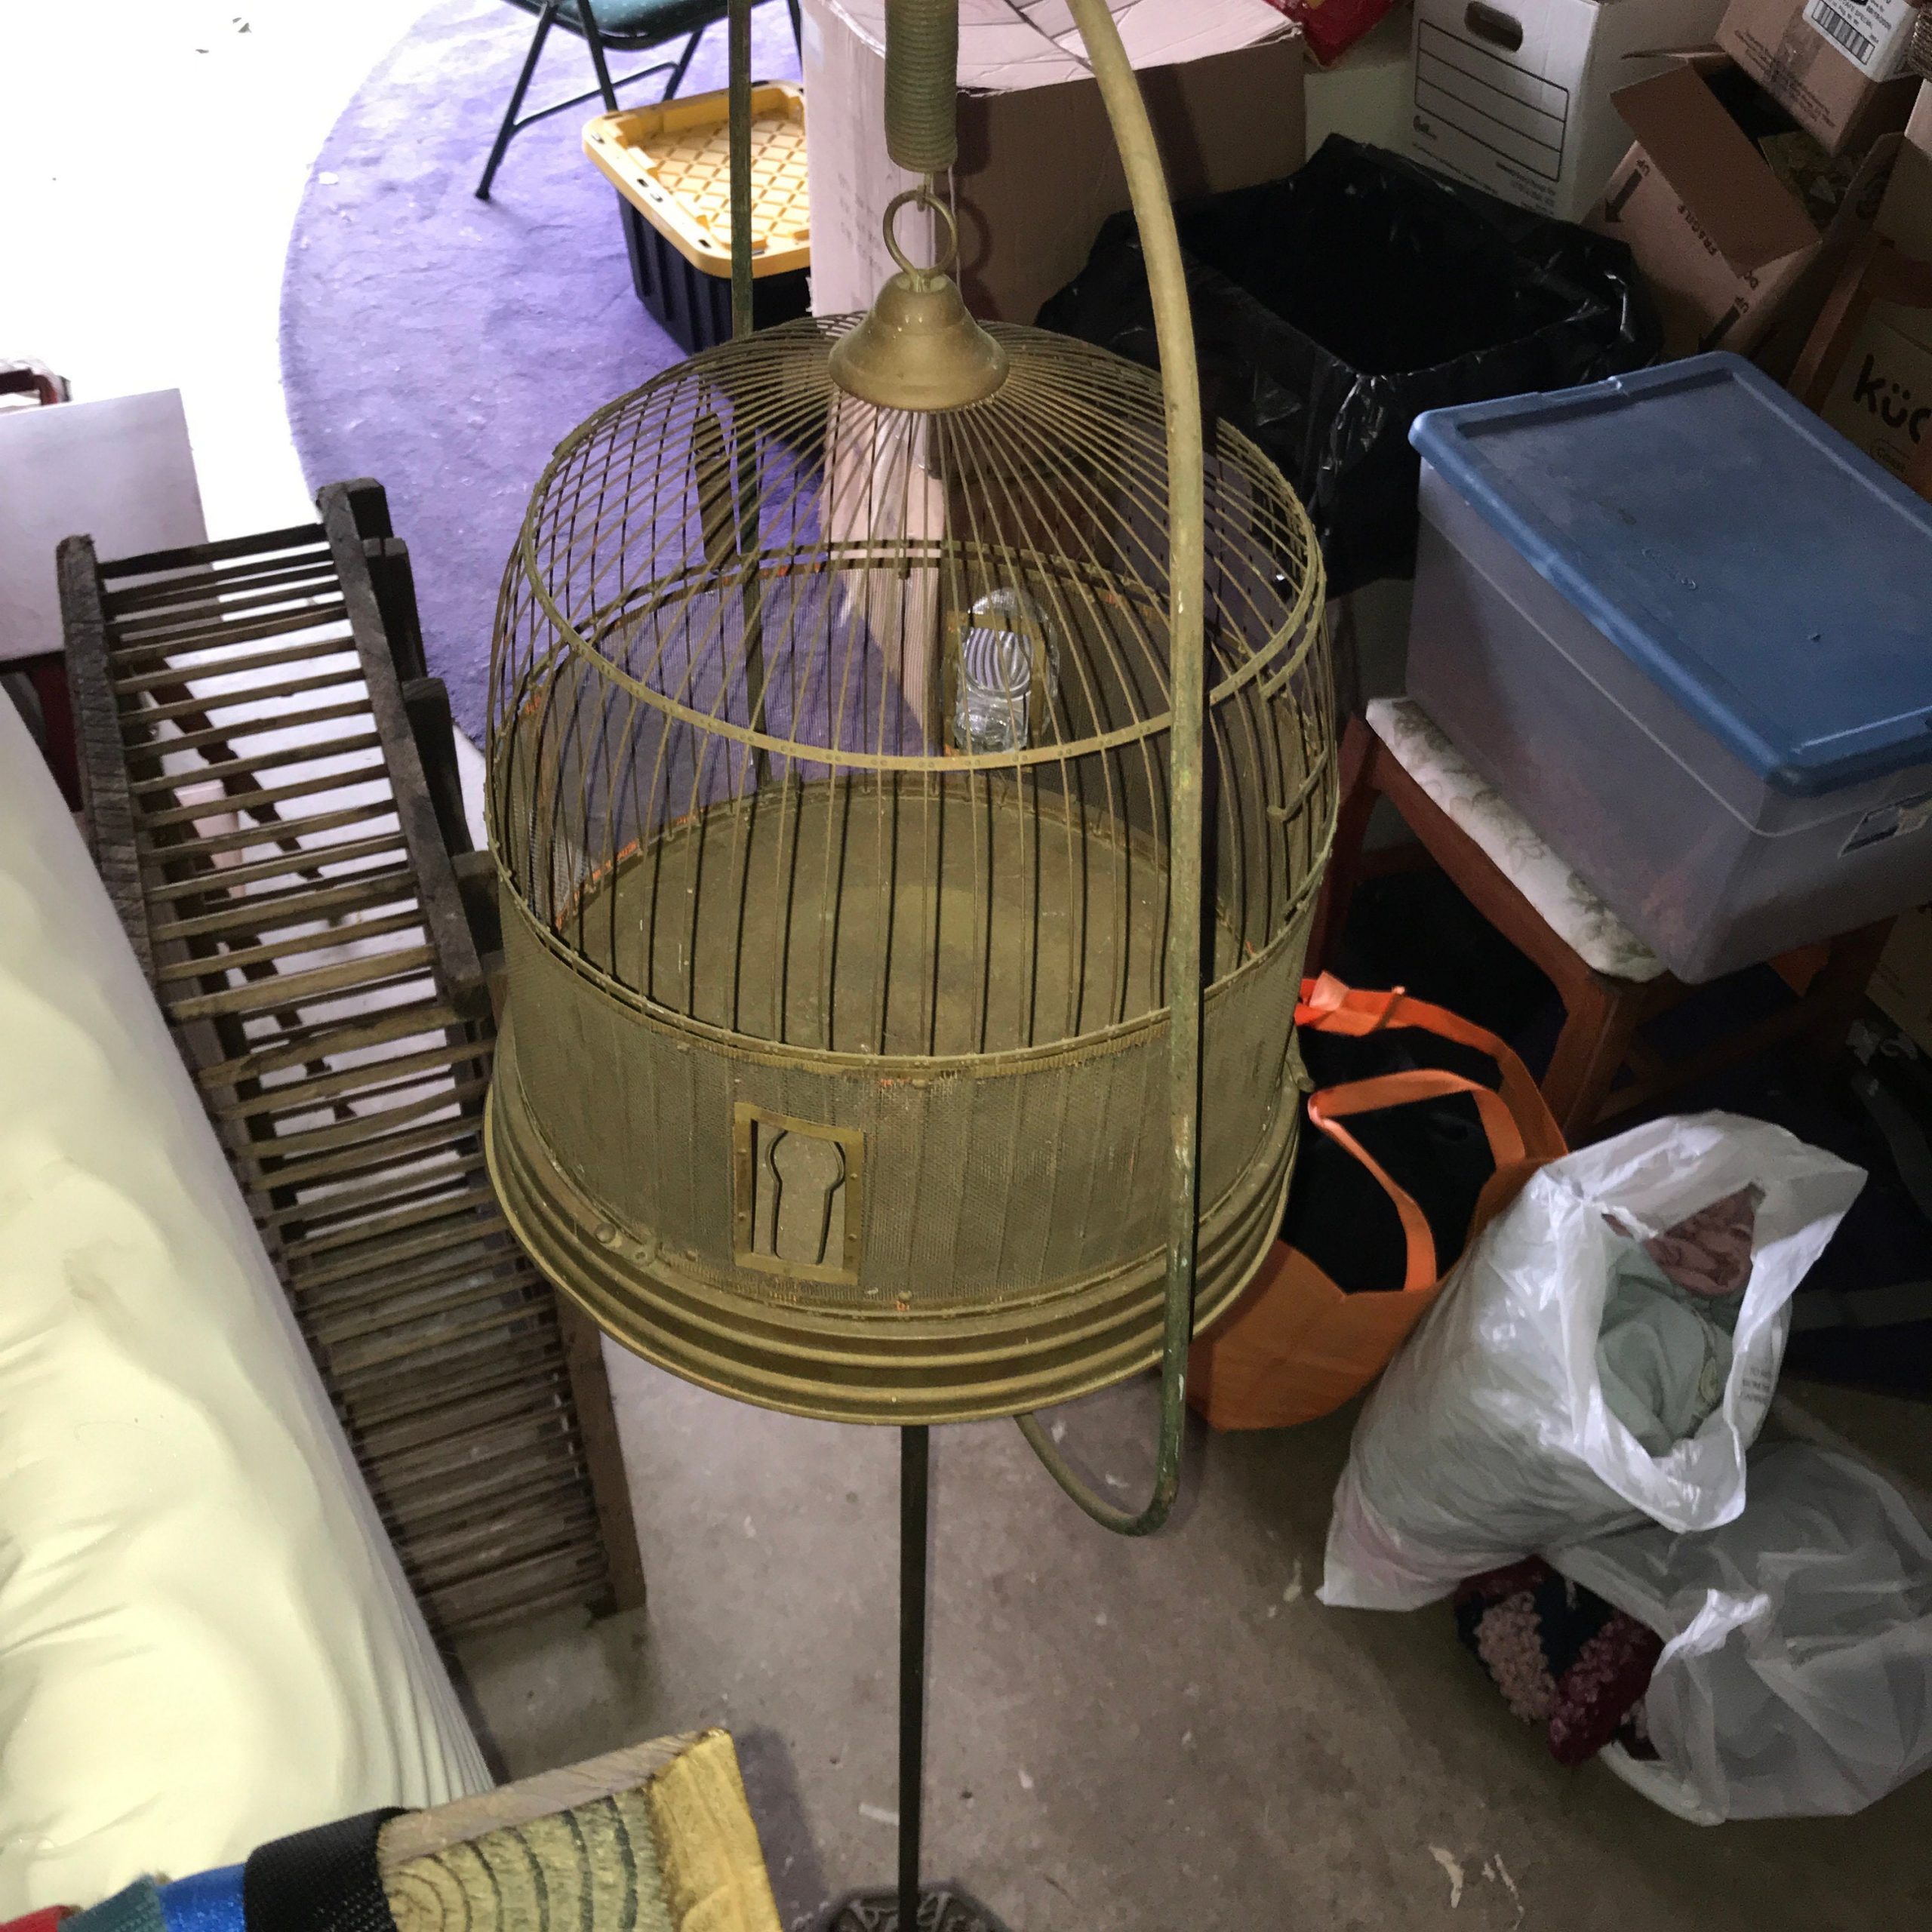 https://www.truevintageantiques.com/wp-content/uploads/2020/04/vintage-bird-cage-hanging-cage-brass-with-original-patina-farmhouse-collectible-cottage-cast-iron-stand-1-glass-food-water-dish-home-decor-5ea21f5f10-scaled.jpg